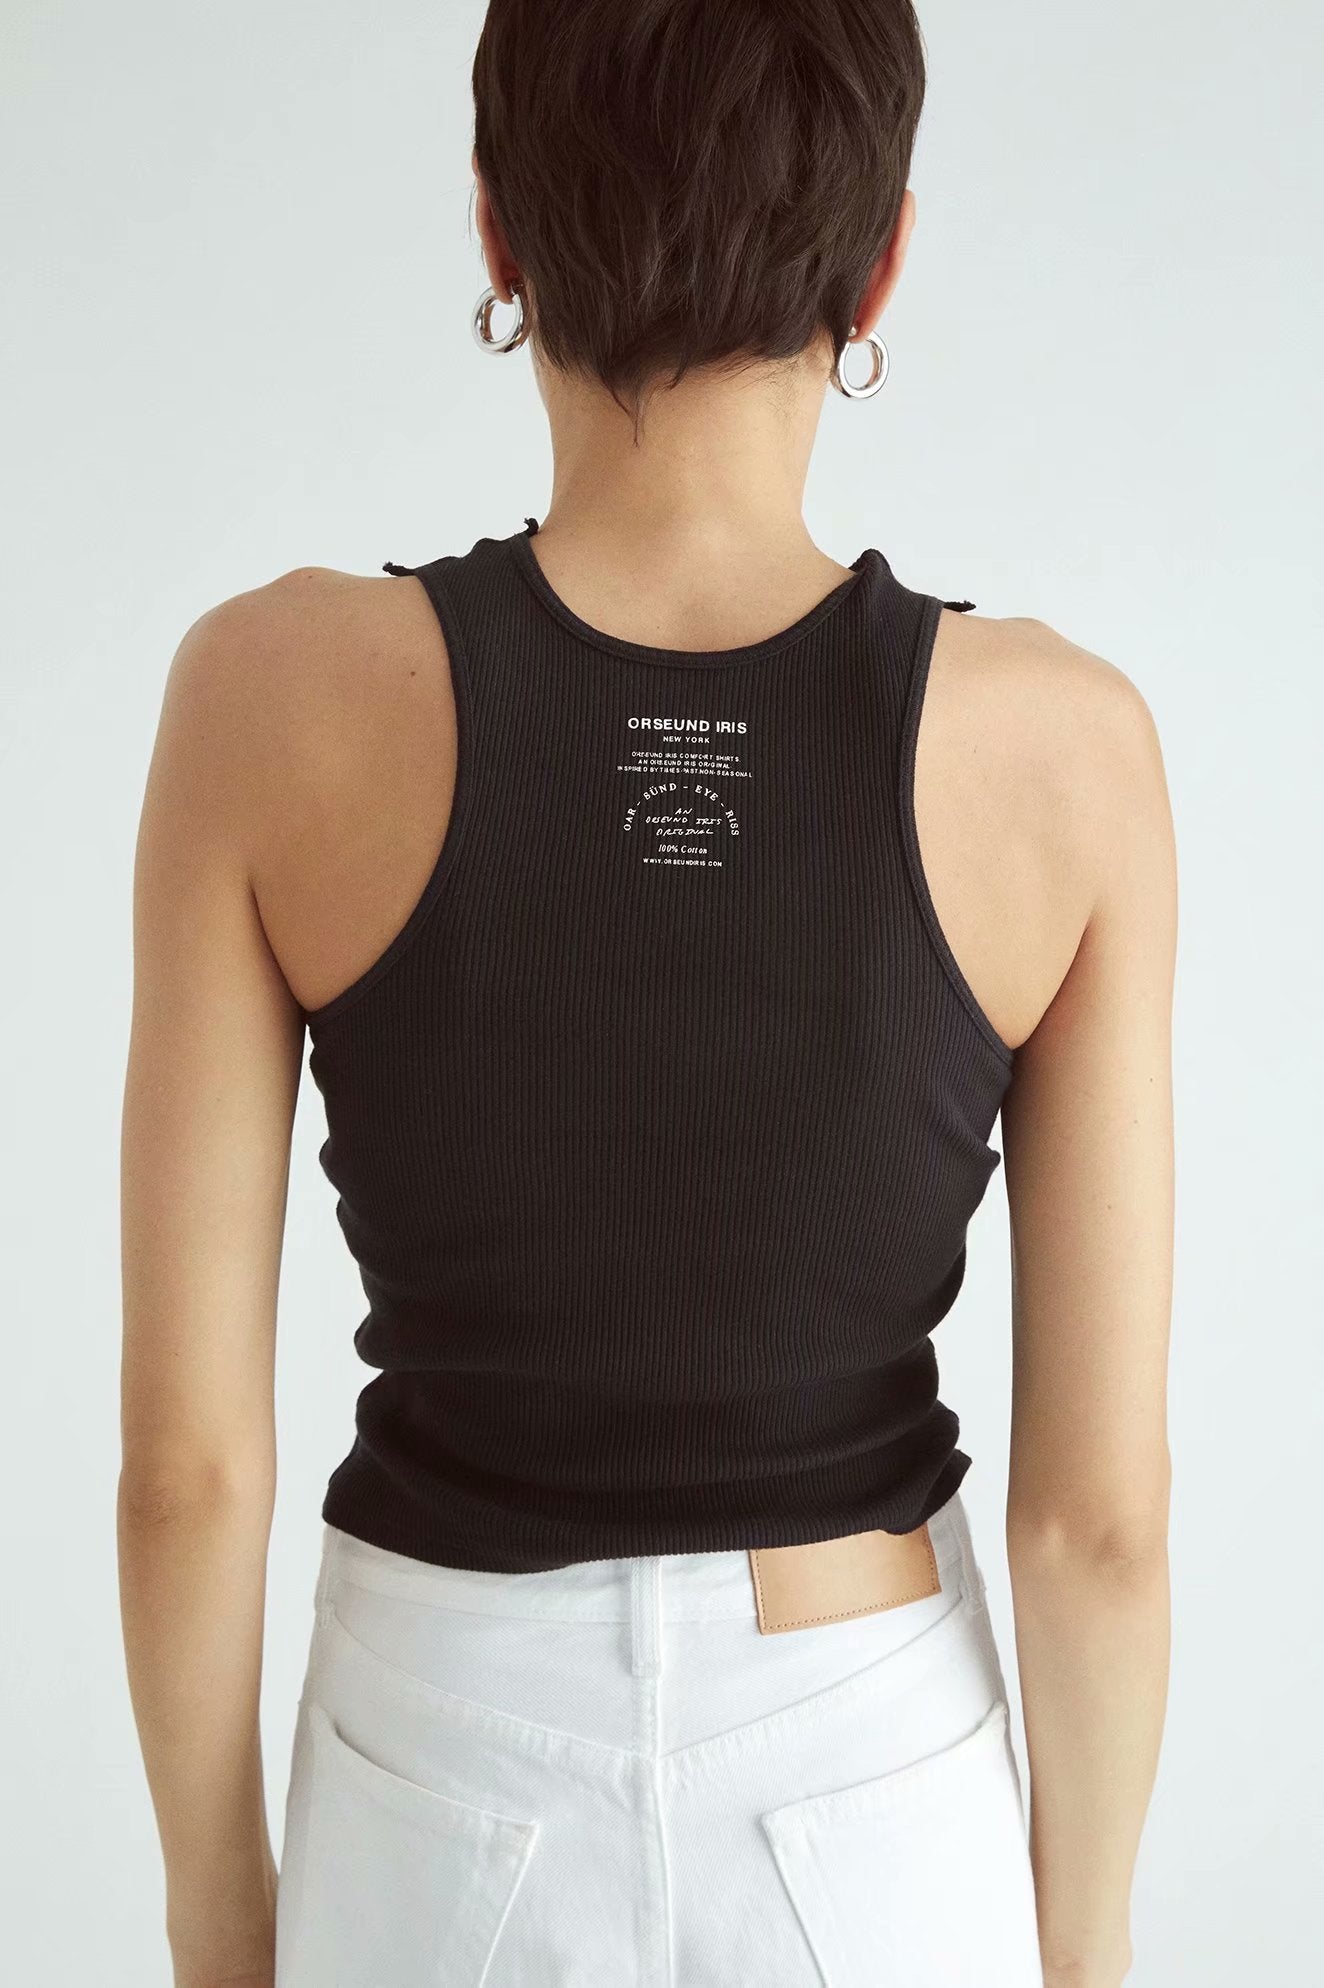 OOTDGIRL Embroidery Letter Women Tank Tops Sleeveless Ribbed Short Crop Top Mujer Verano 2022 Fashion Streetwear Casual Clothes